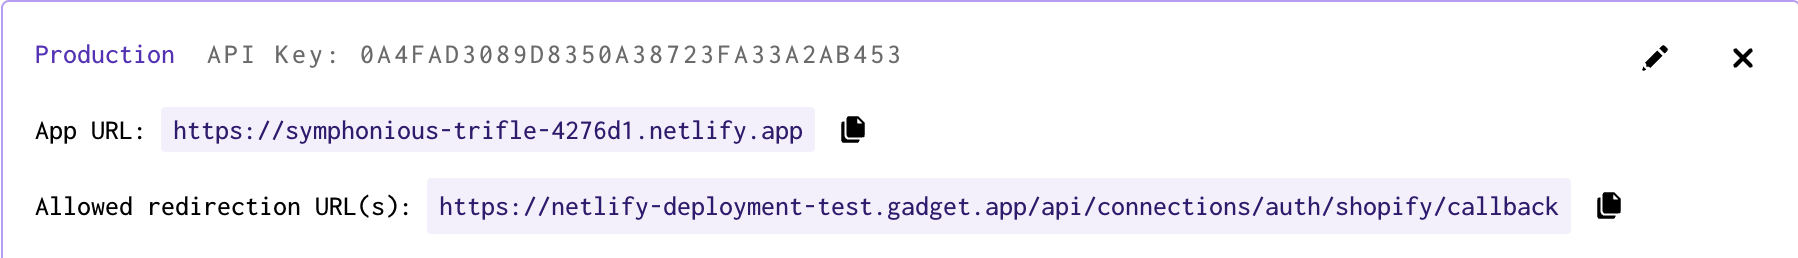 Section in Gadget that displays Shopify app connections